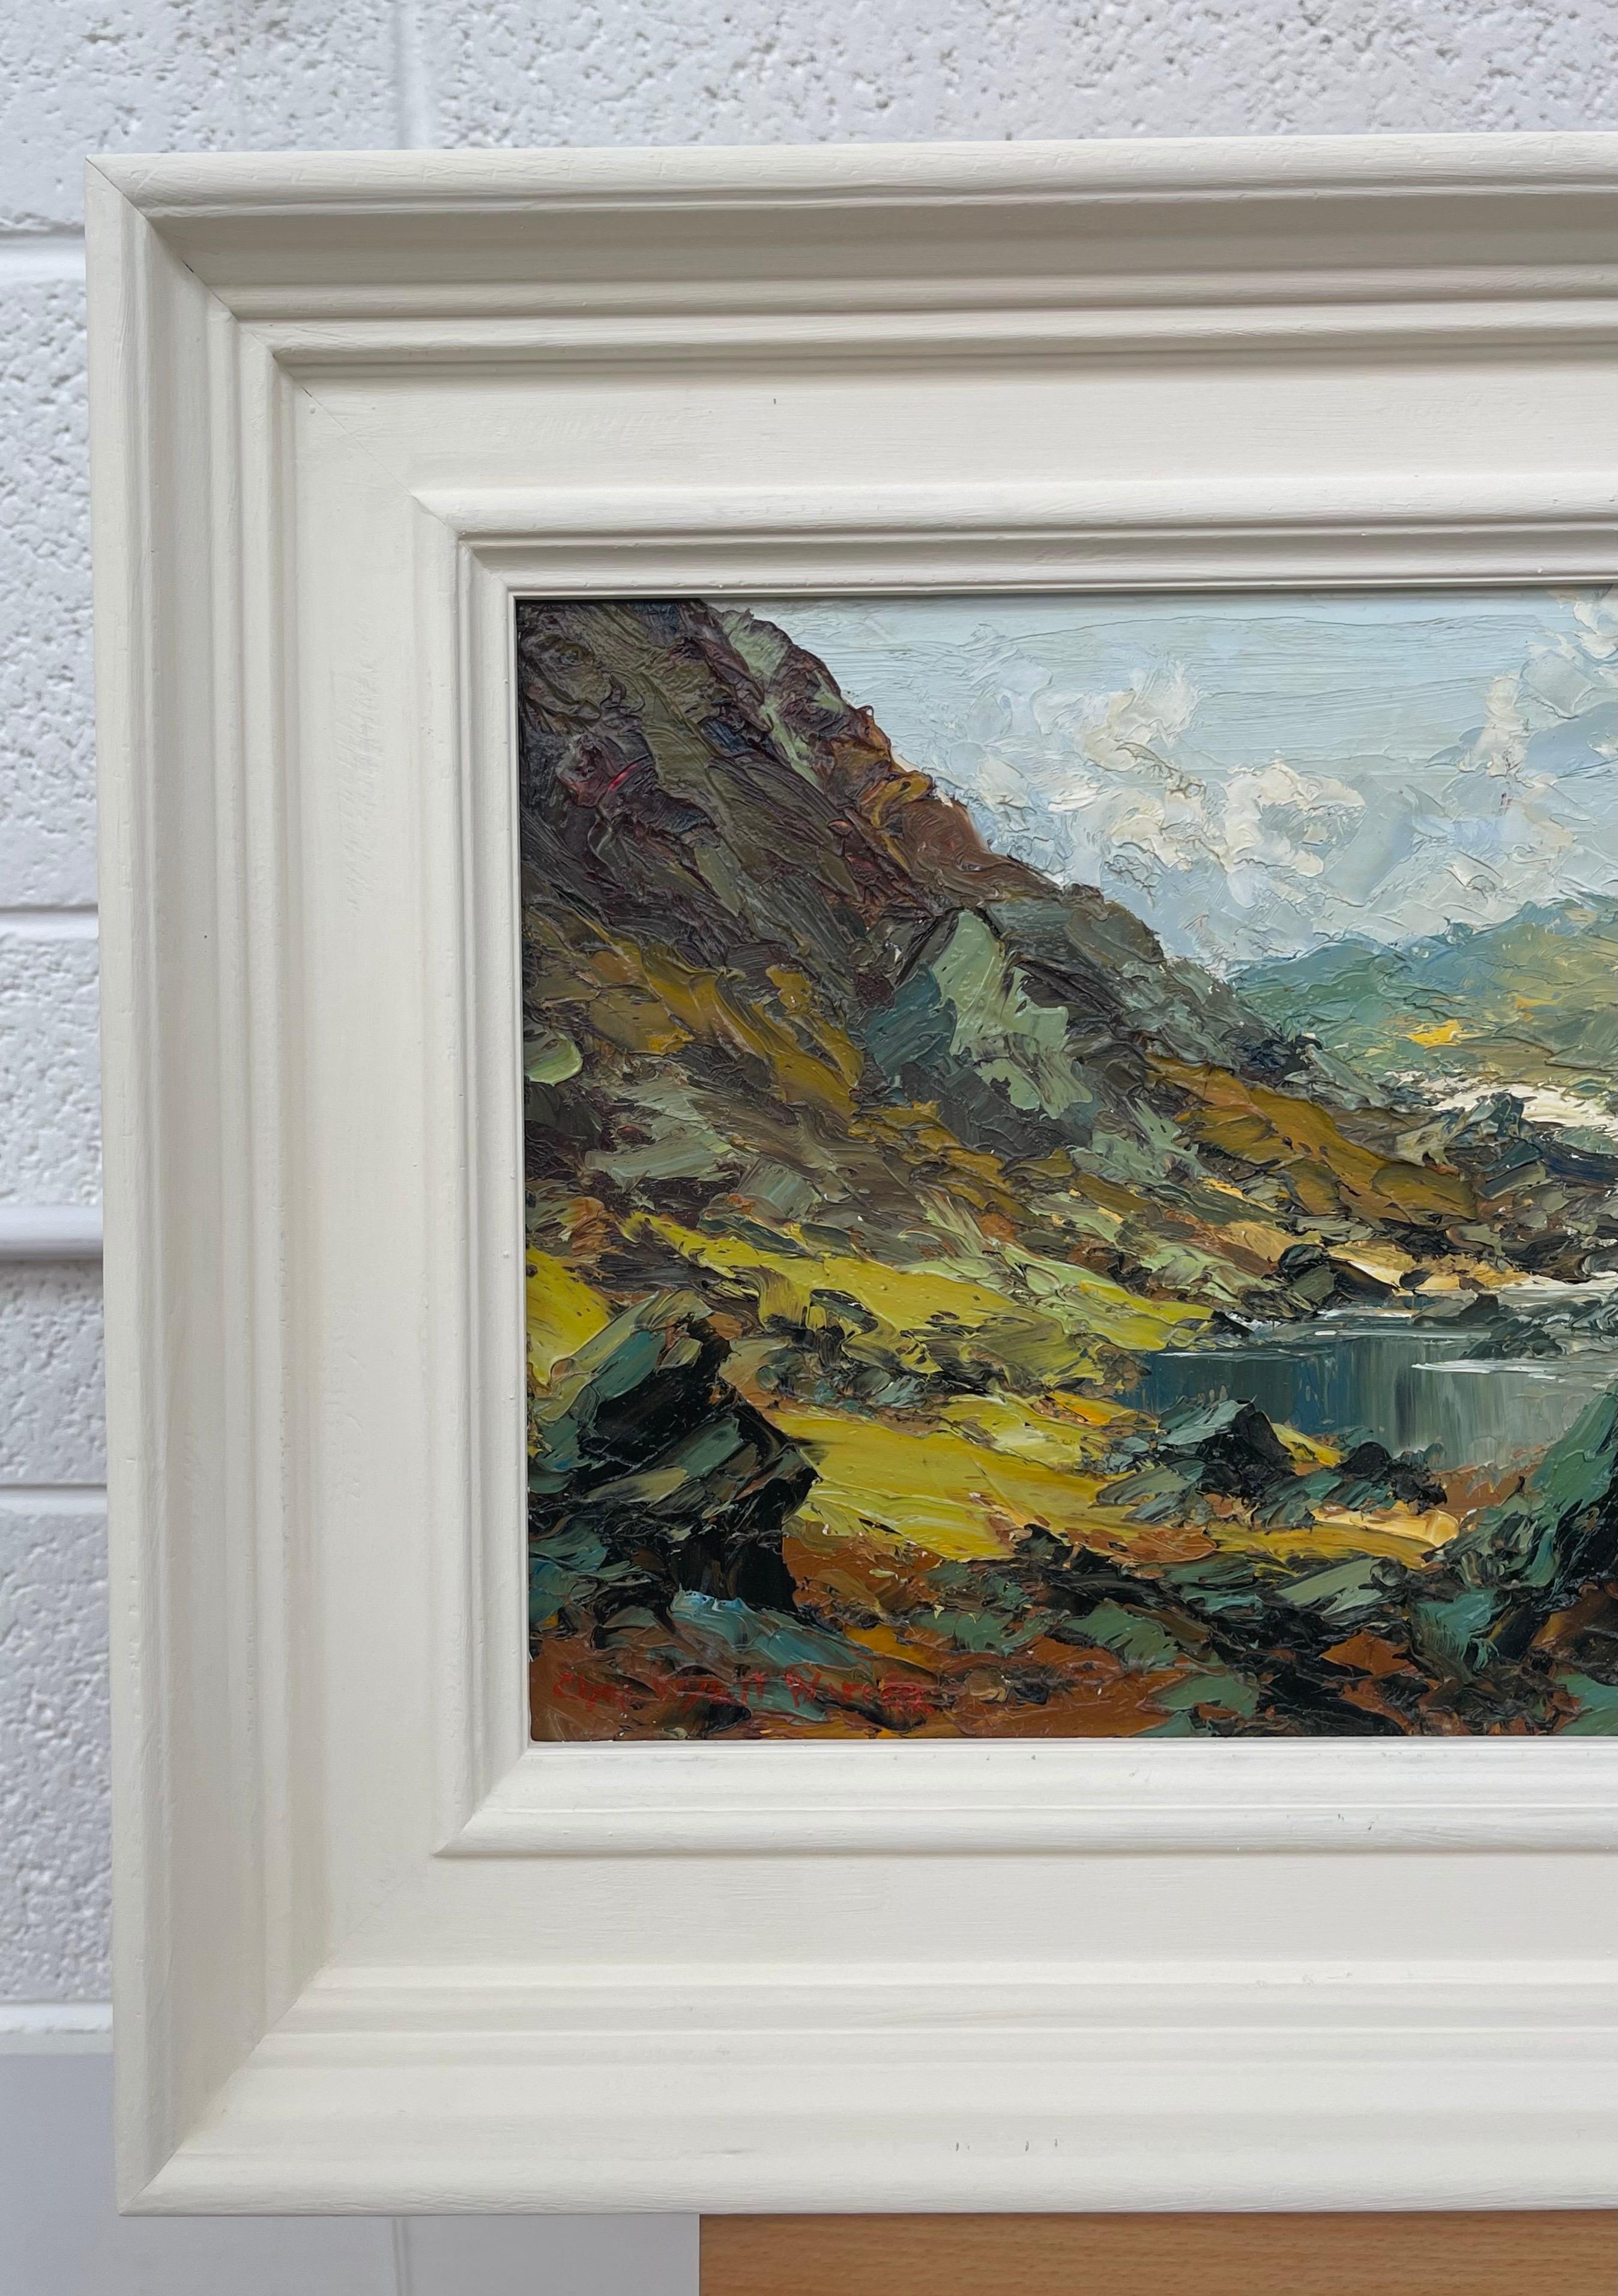 Original Impasto Oil Painting of River Mountain Scene in Wales by British Artist Charles Wyatt Warren (1908-1993)

Art measures 21 x 9 inches 
Frame measures 26 x 14 inches 

Charles Wyatt Warren (1908-1993) was a self-taught painter and an